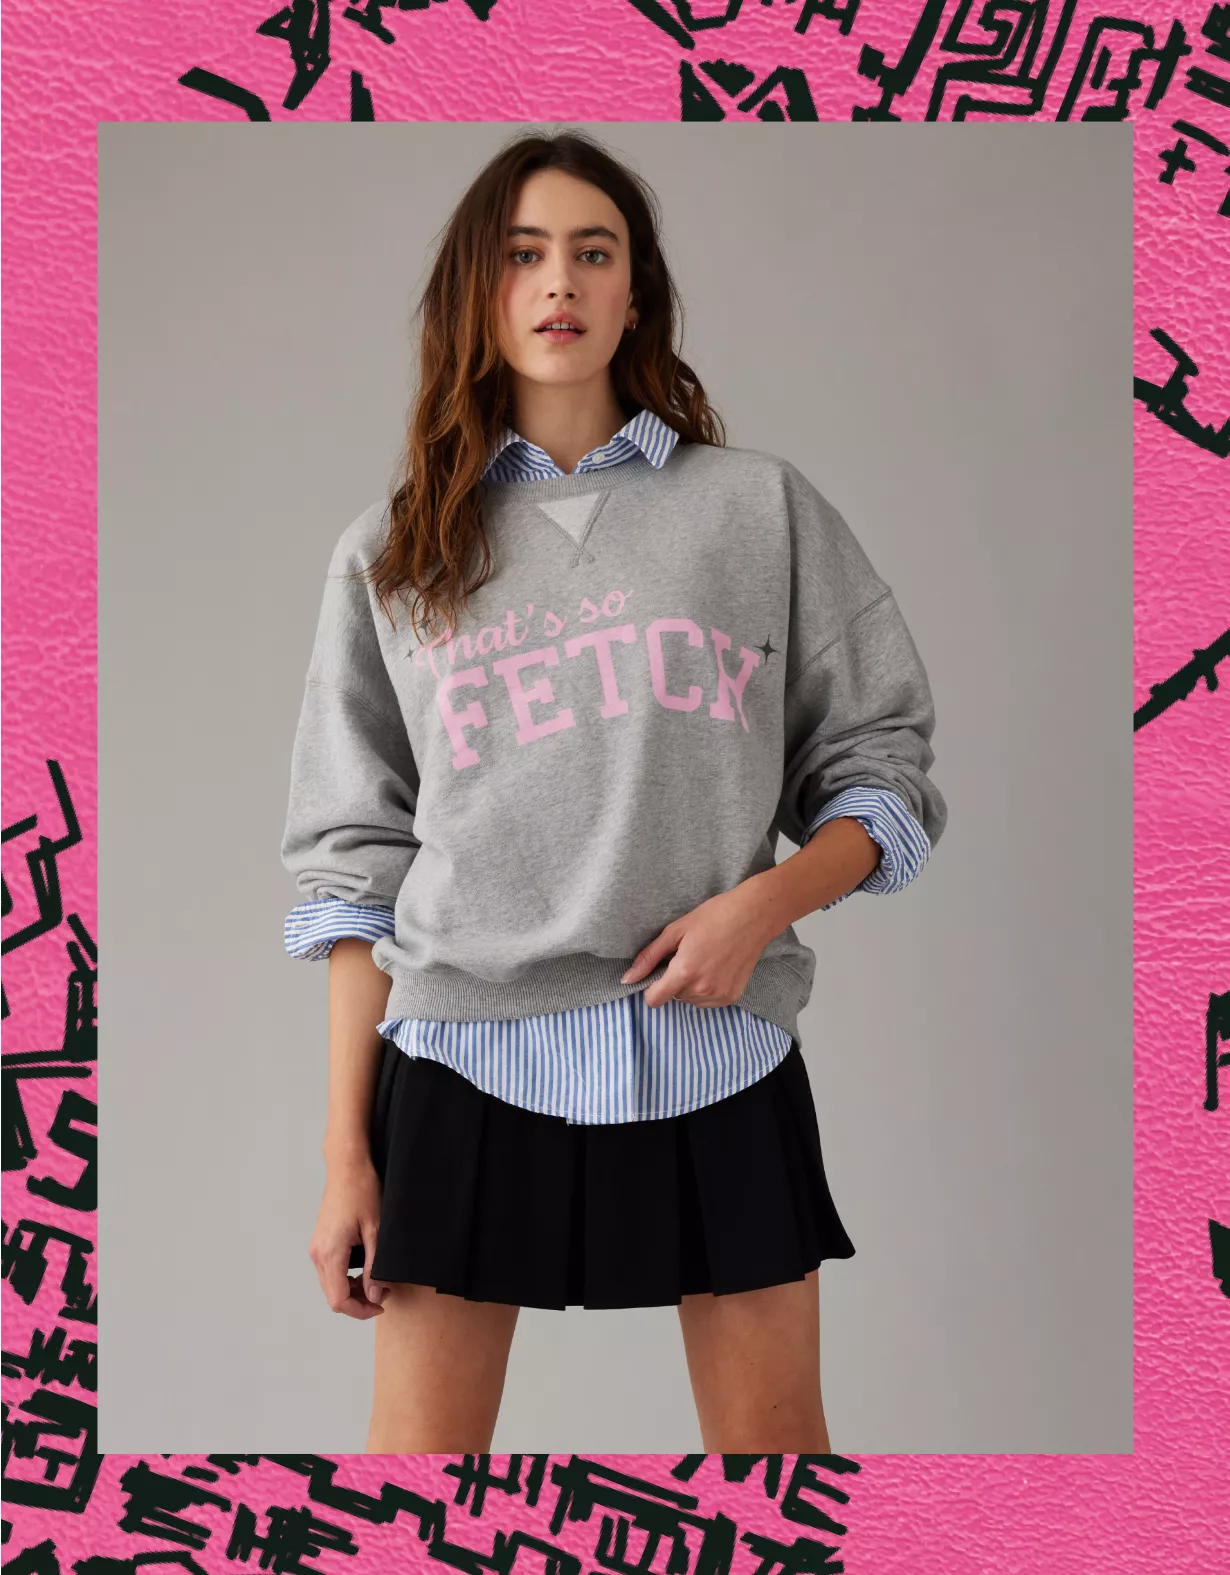 The Foot Cardigan x Mean Girls Sock Collaboration Is So Fetch